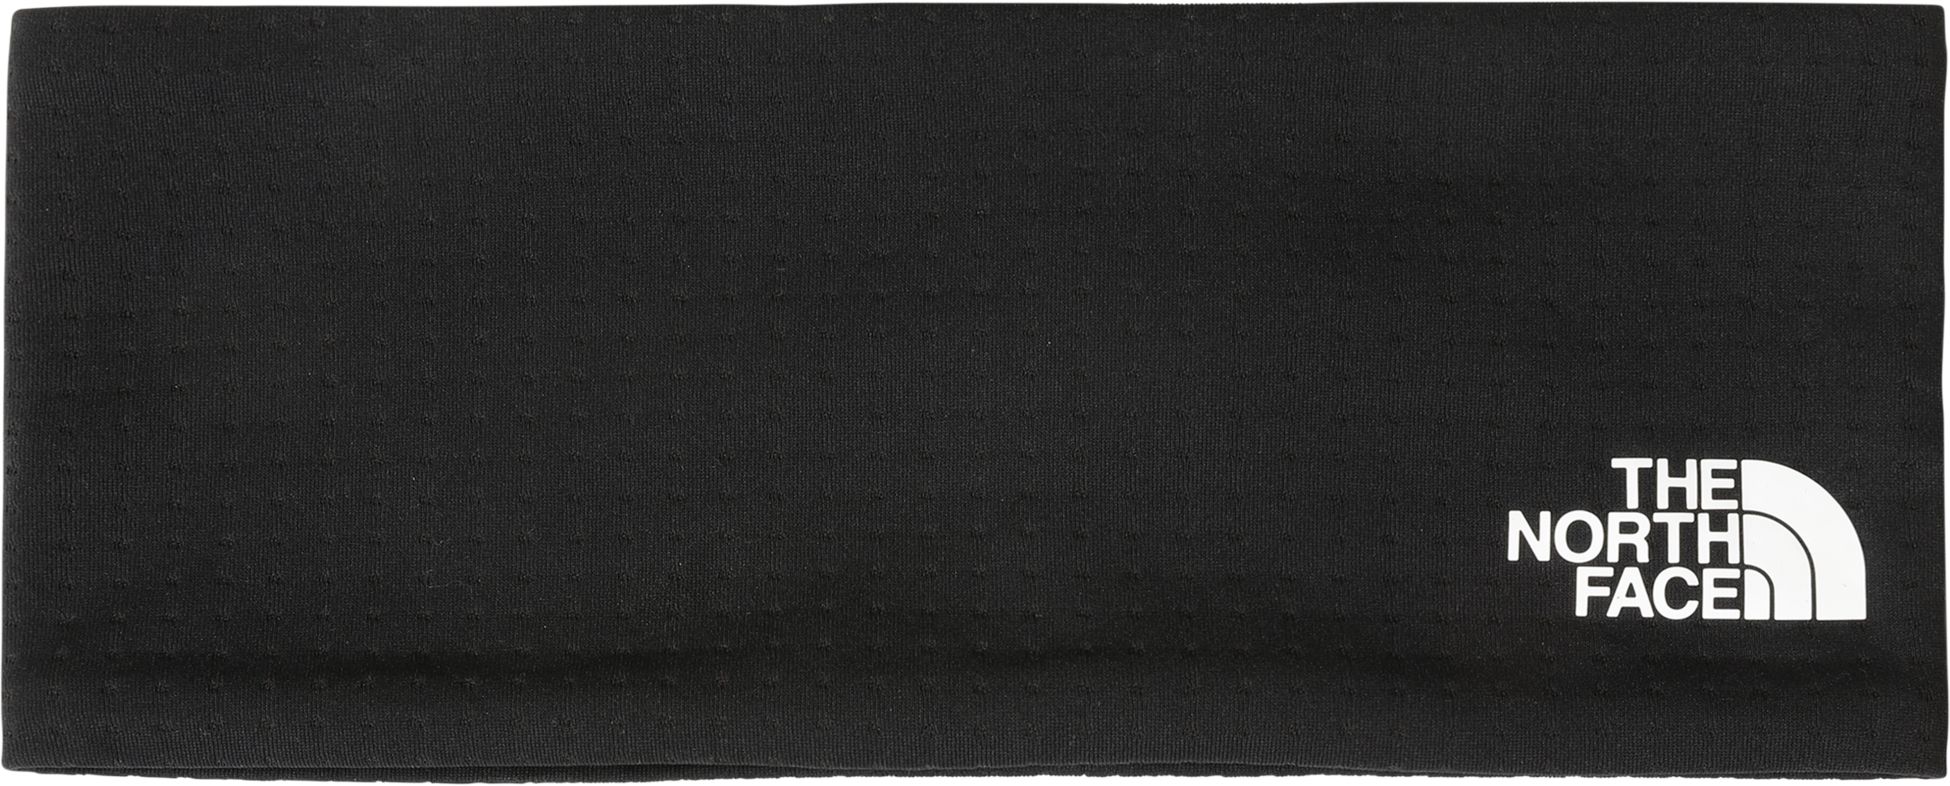 THE NORTH FACE, FASTECH HEADBAND